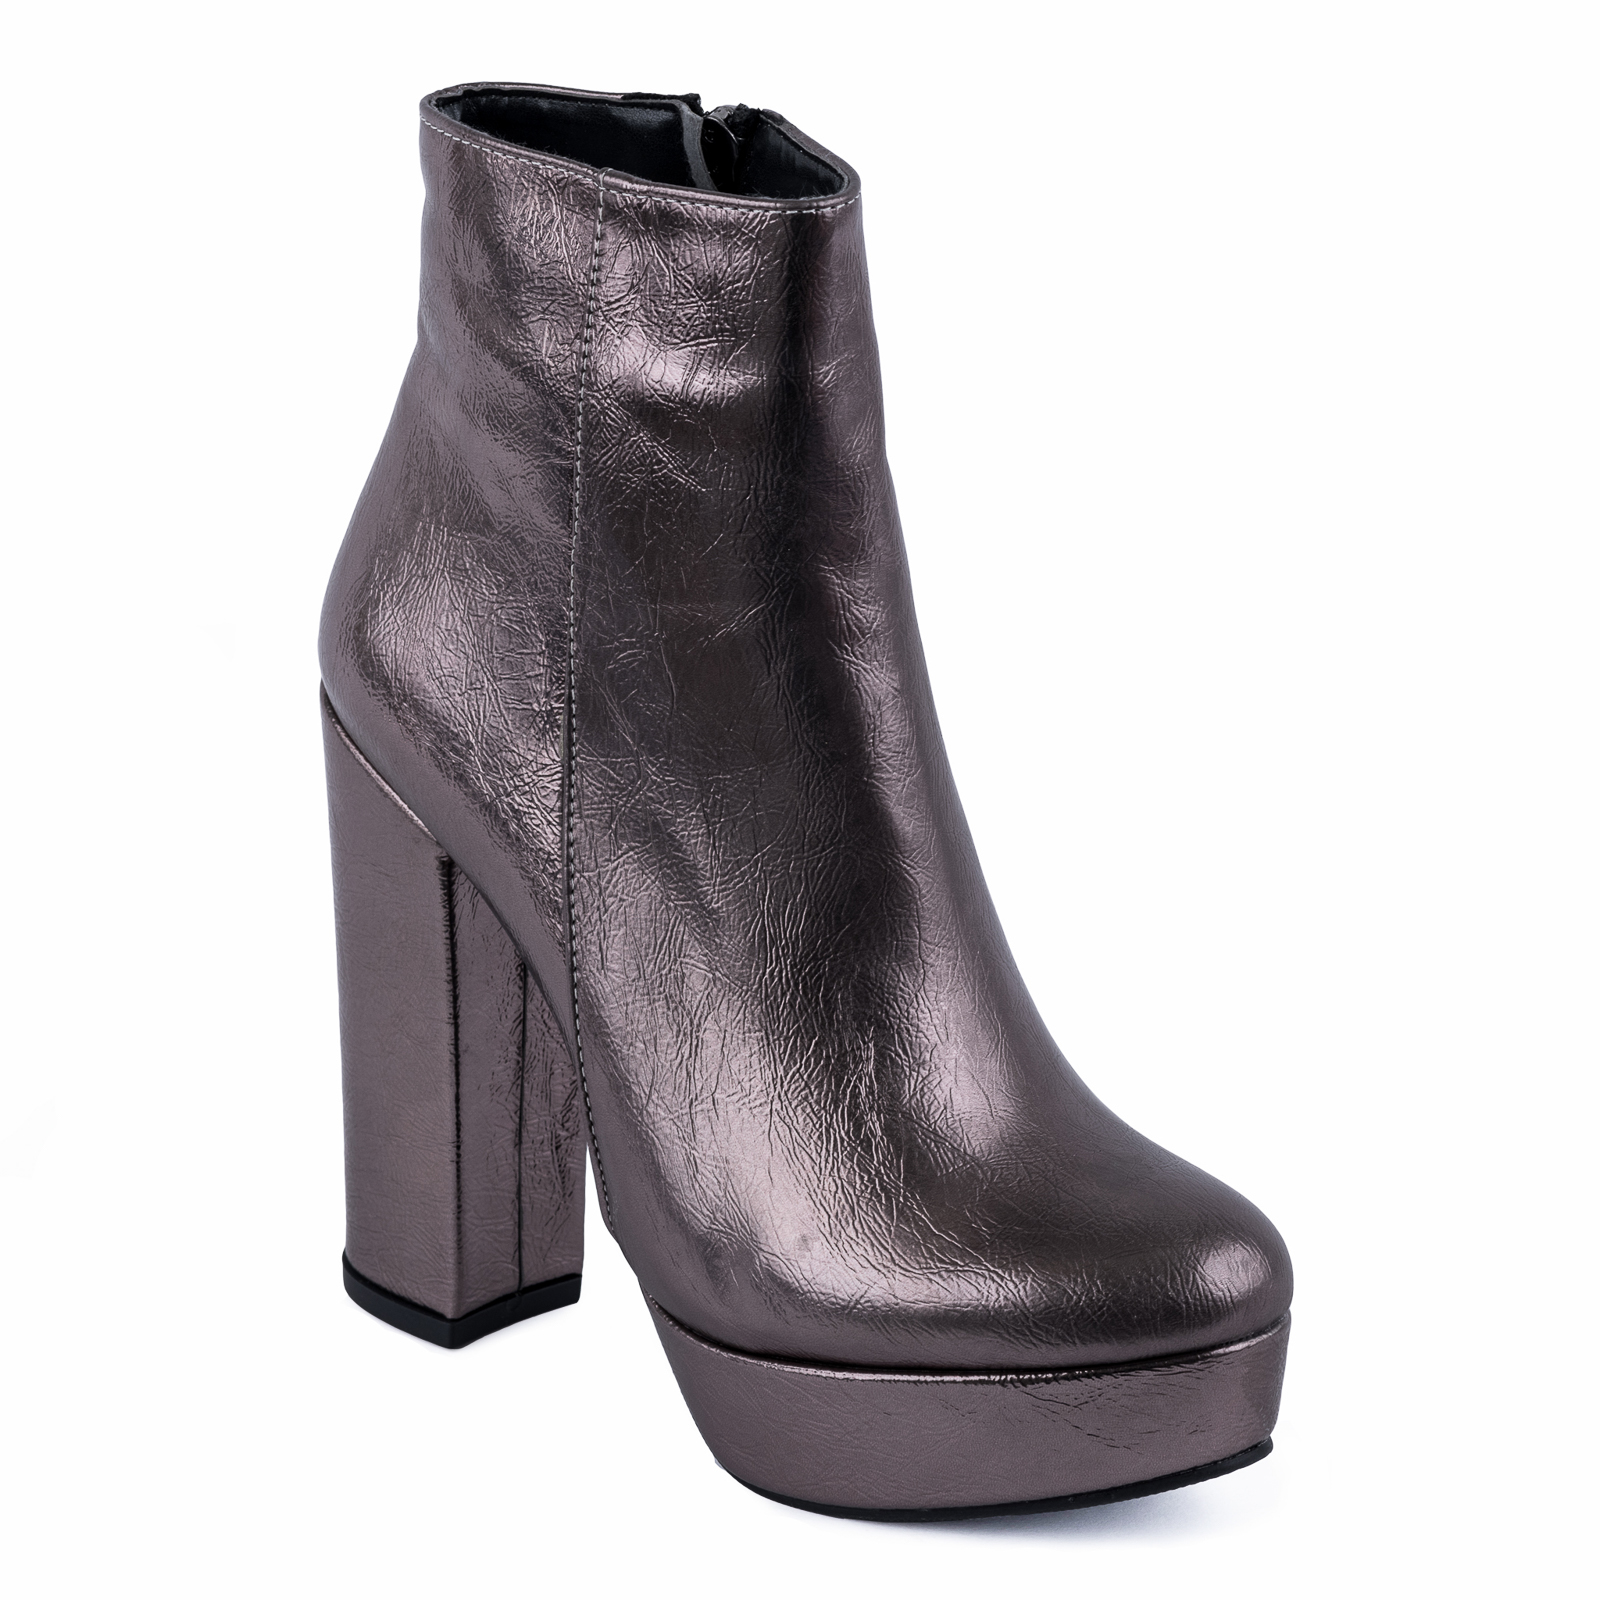 PLATFORM ANKLE BOOTS WITH THICK HEEL - GRAPHITE